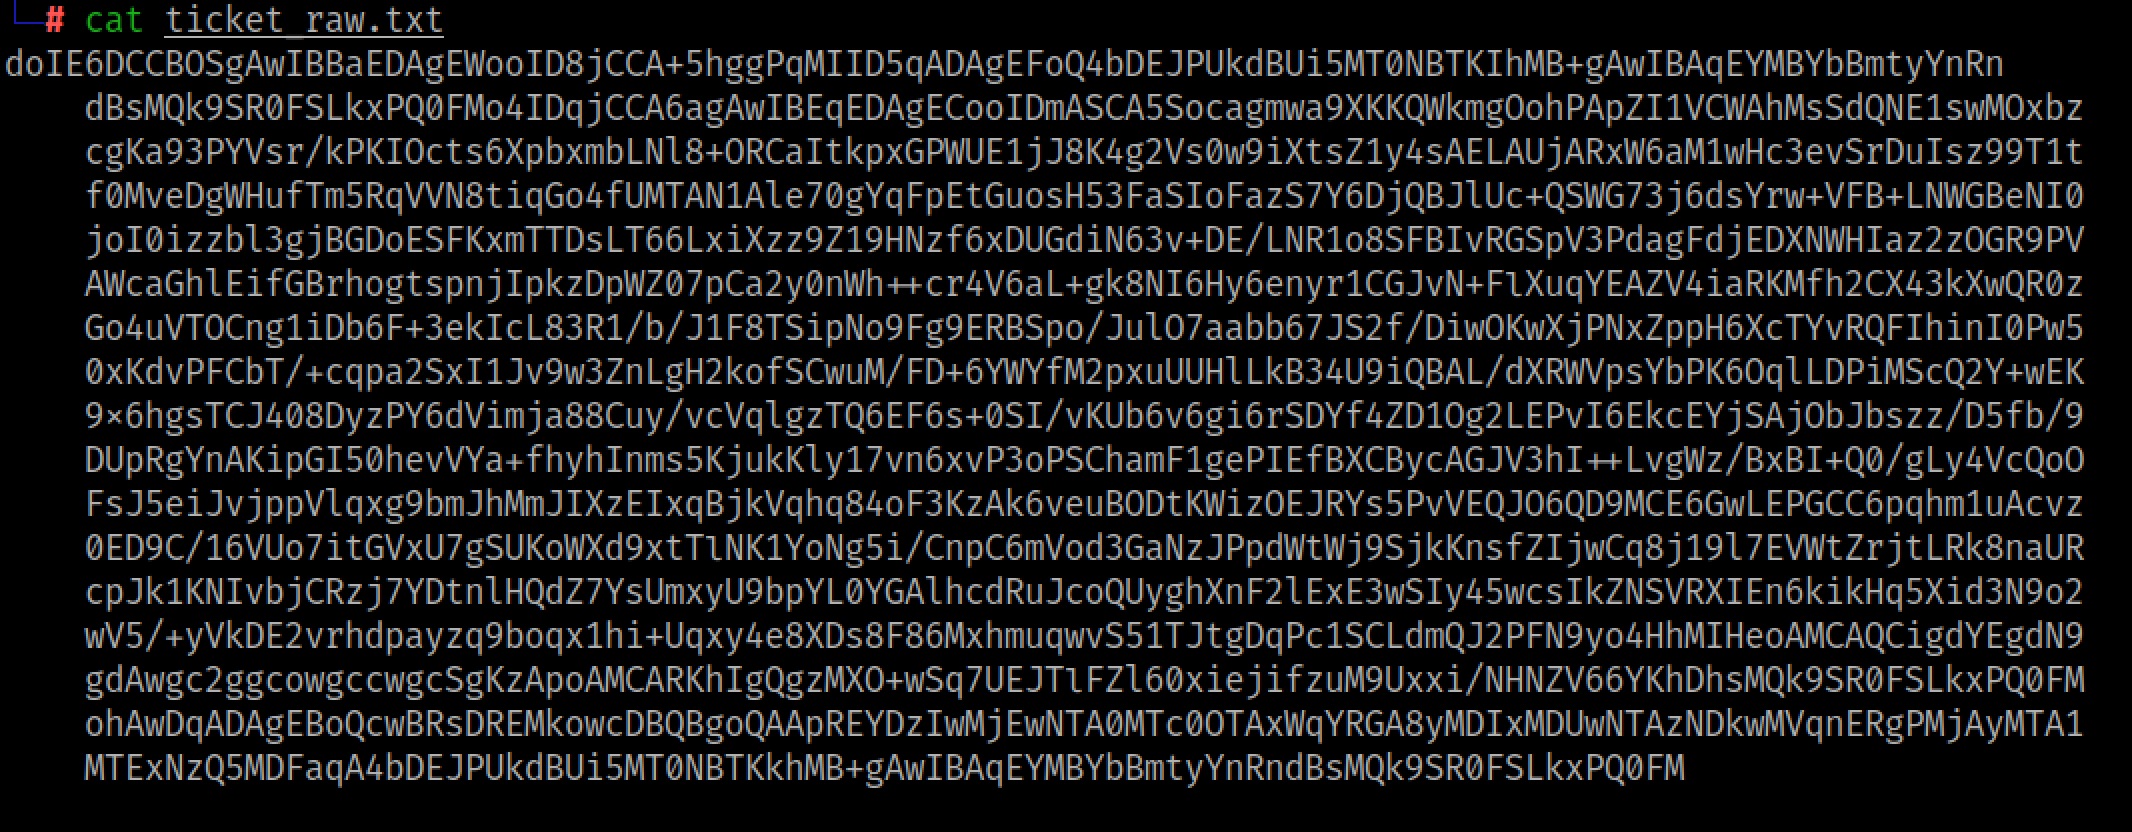 The base64 ticket data copied into a file